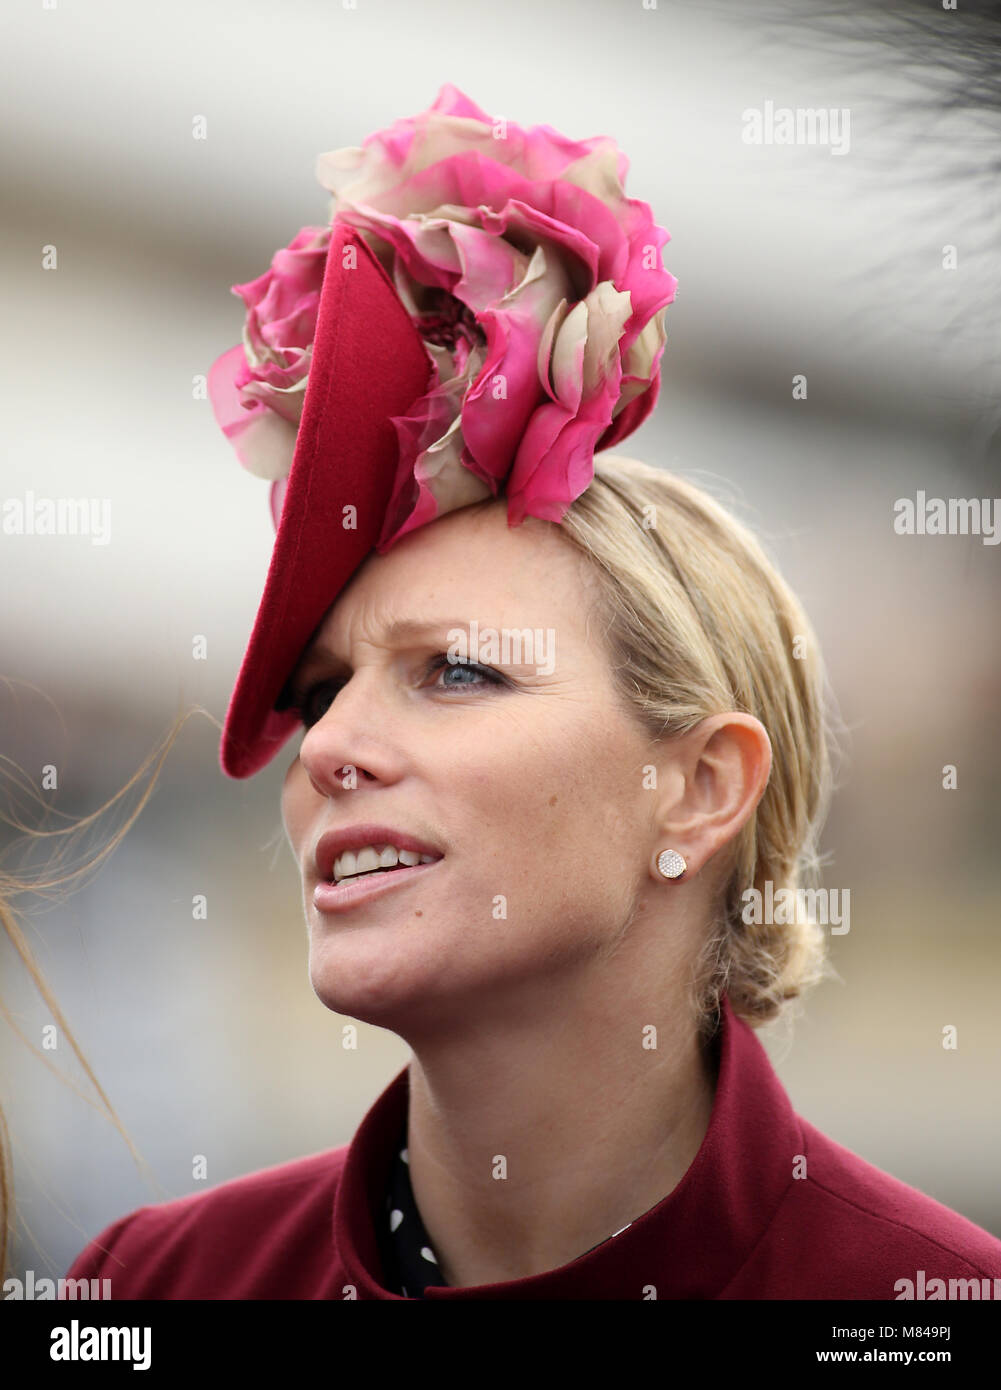 Zara Tindall during Ladies Day of the 2018 Cheltenham Festival at Cheltenham Racecourse. PRESS ASSOCIATION Photo. Picture date: Wednesday March 14, 2018. See PA story RACING Cheltenham. Photo credit should read: Steven Paston/PA Wire. Stock Photo